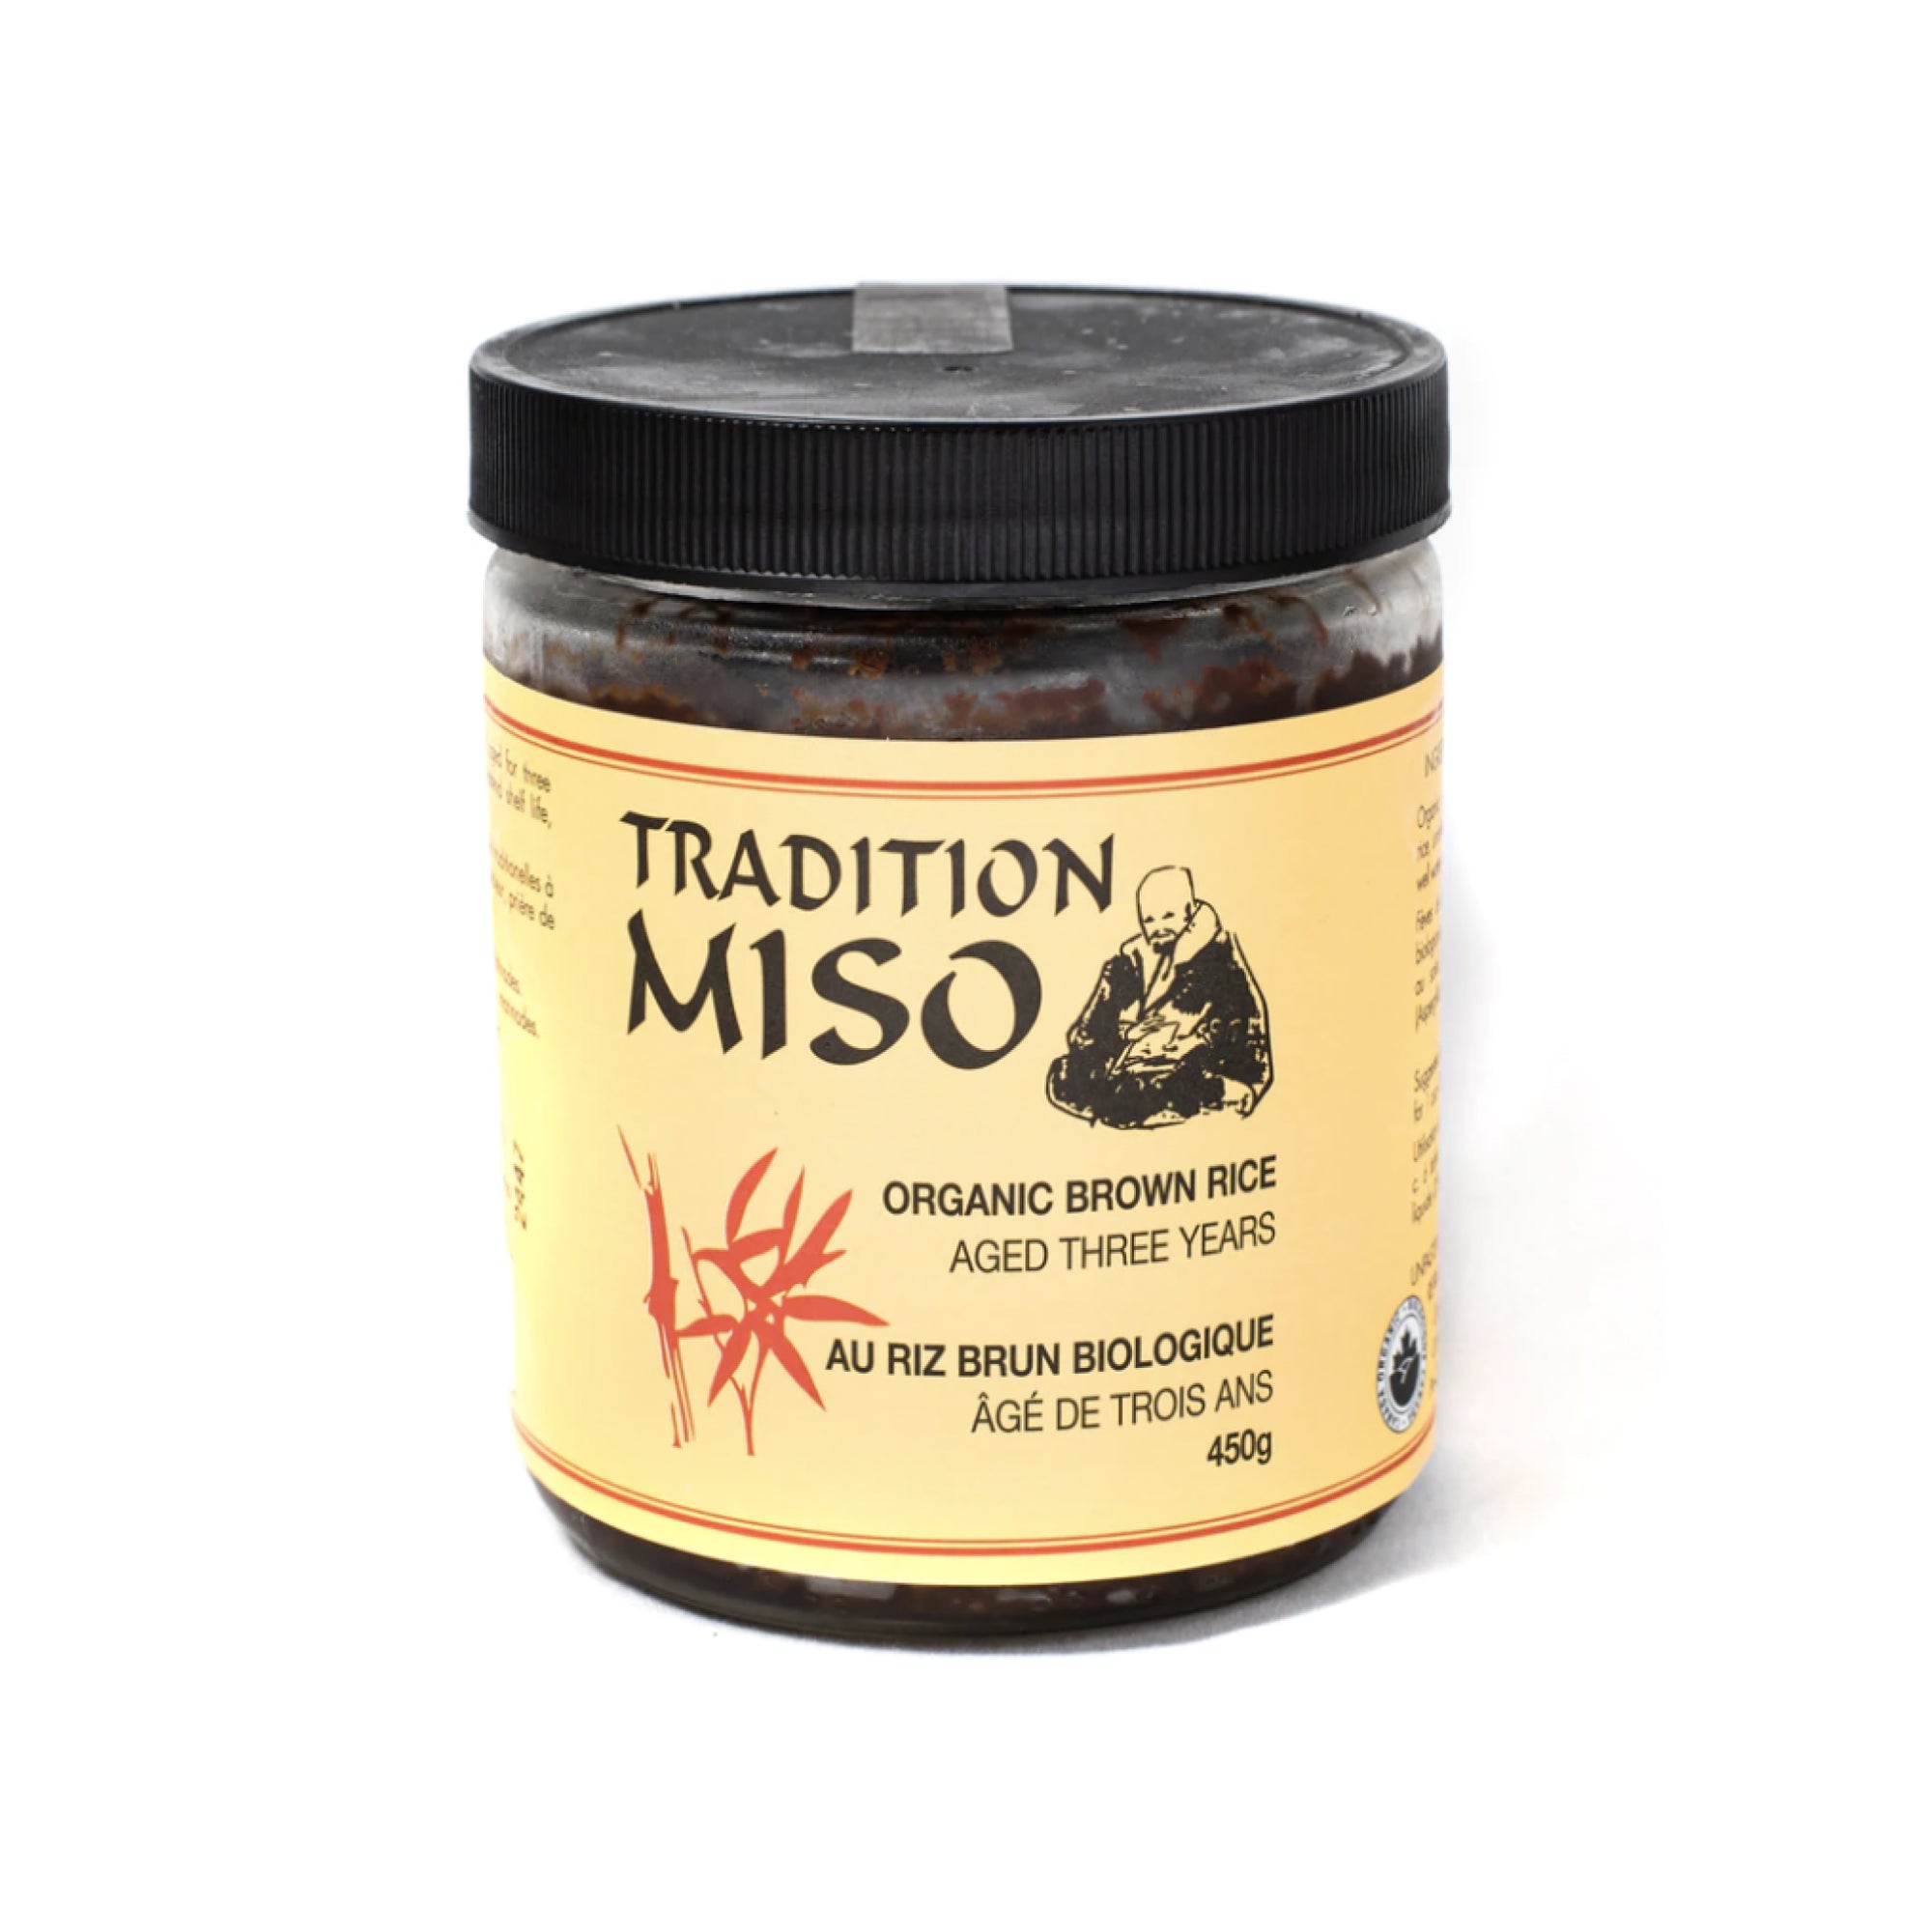 Tradition Miso with Aged Organic Brown Rice 450g